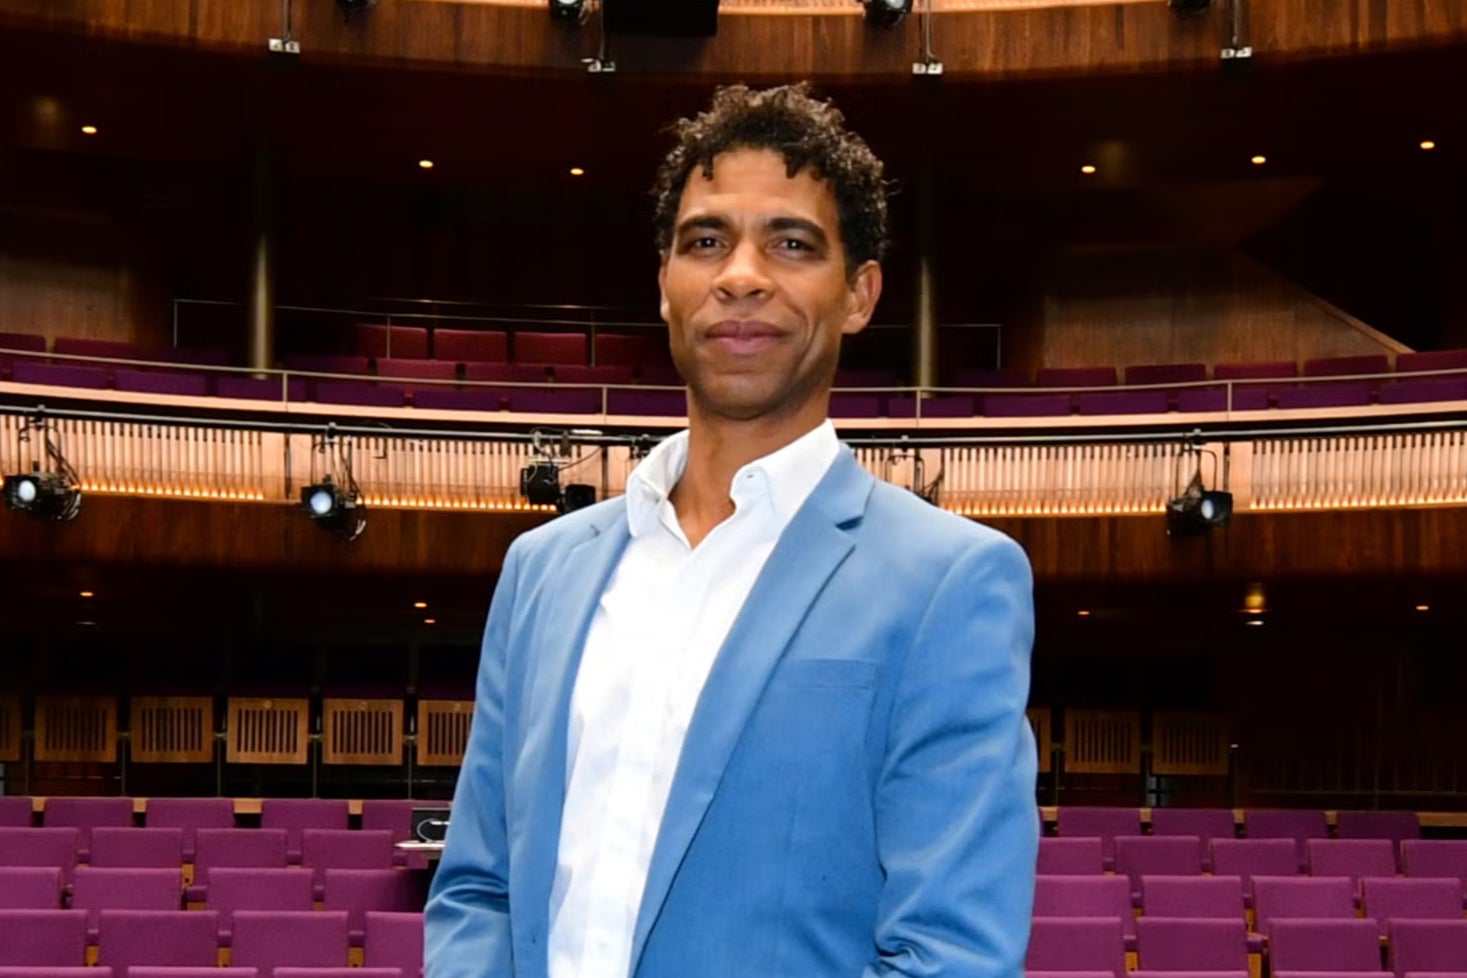 Carlos Acosta is making a rare appearance in his own version of ‘Carmen’ at Sadler’s Wells